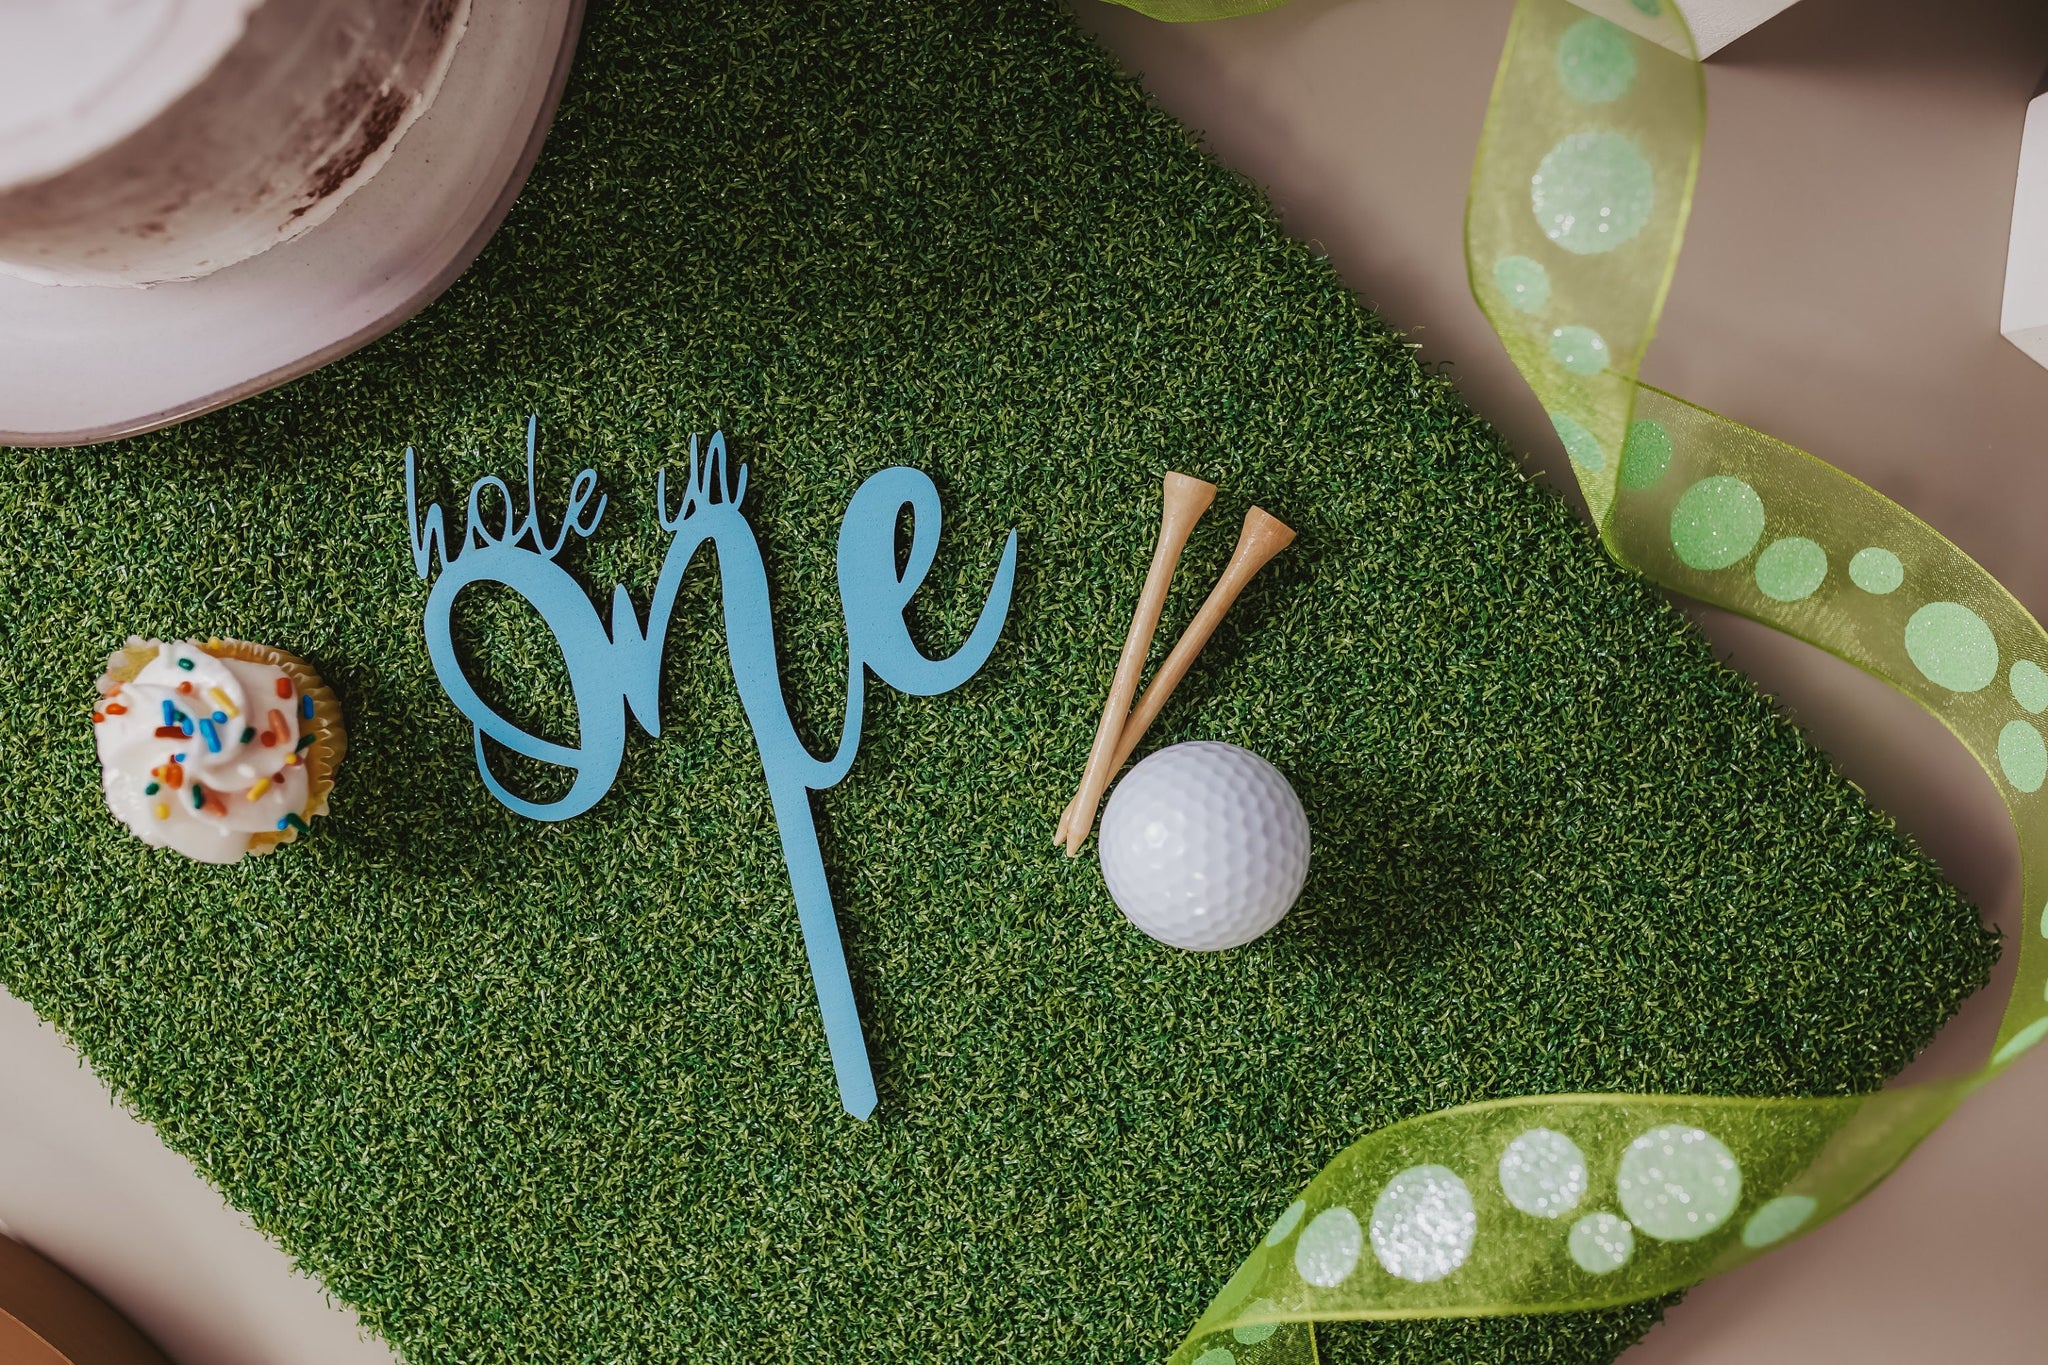 Hole In One Baby Blue Cake Topper For Boys First Golf Birthday, Hole In One Boys Cake Topper For Baby Boy Cake Smash Photoshoot